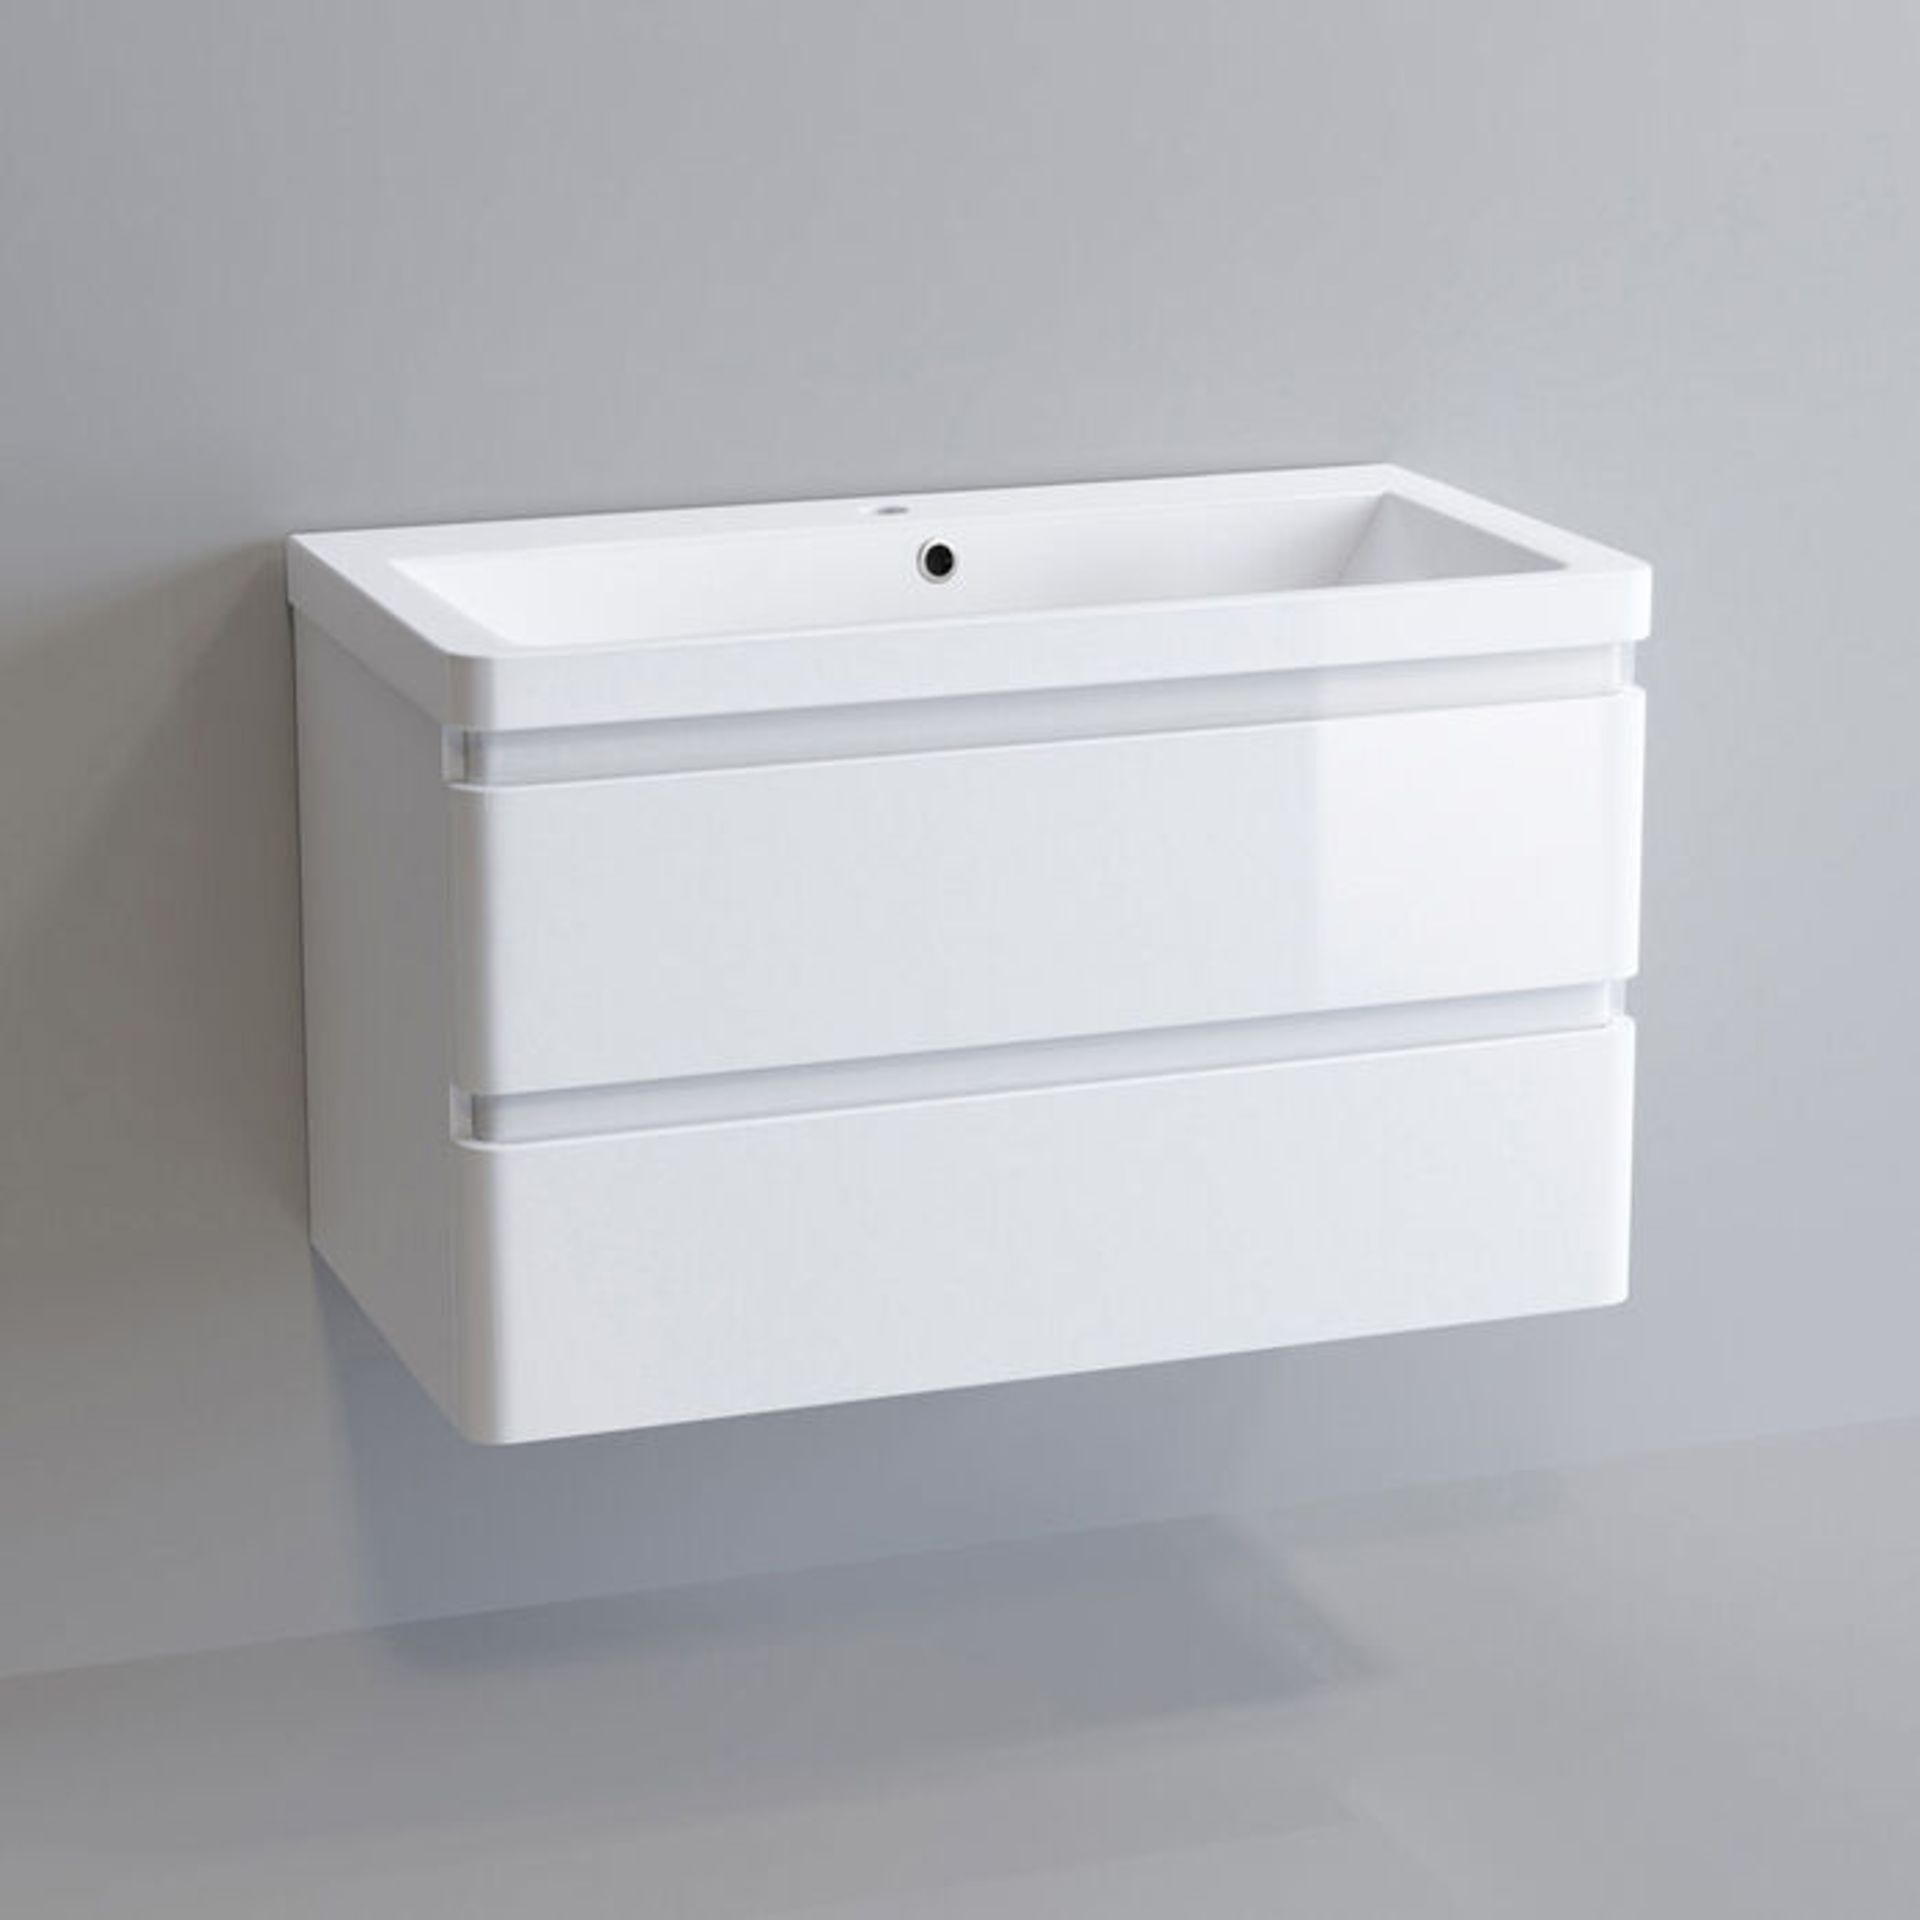 (PC8) 800mm Denver Gloss White Built In Sink Drawer Unit - Wall Hung. RRP £699.99. Comes compl...( - Image 4 of 5